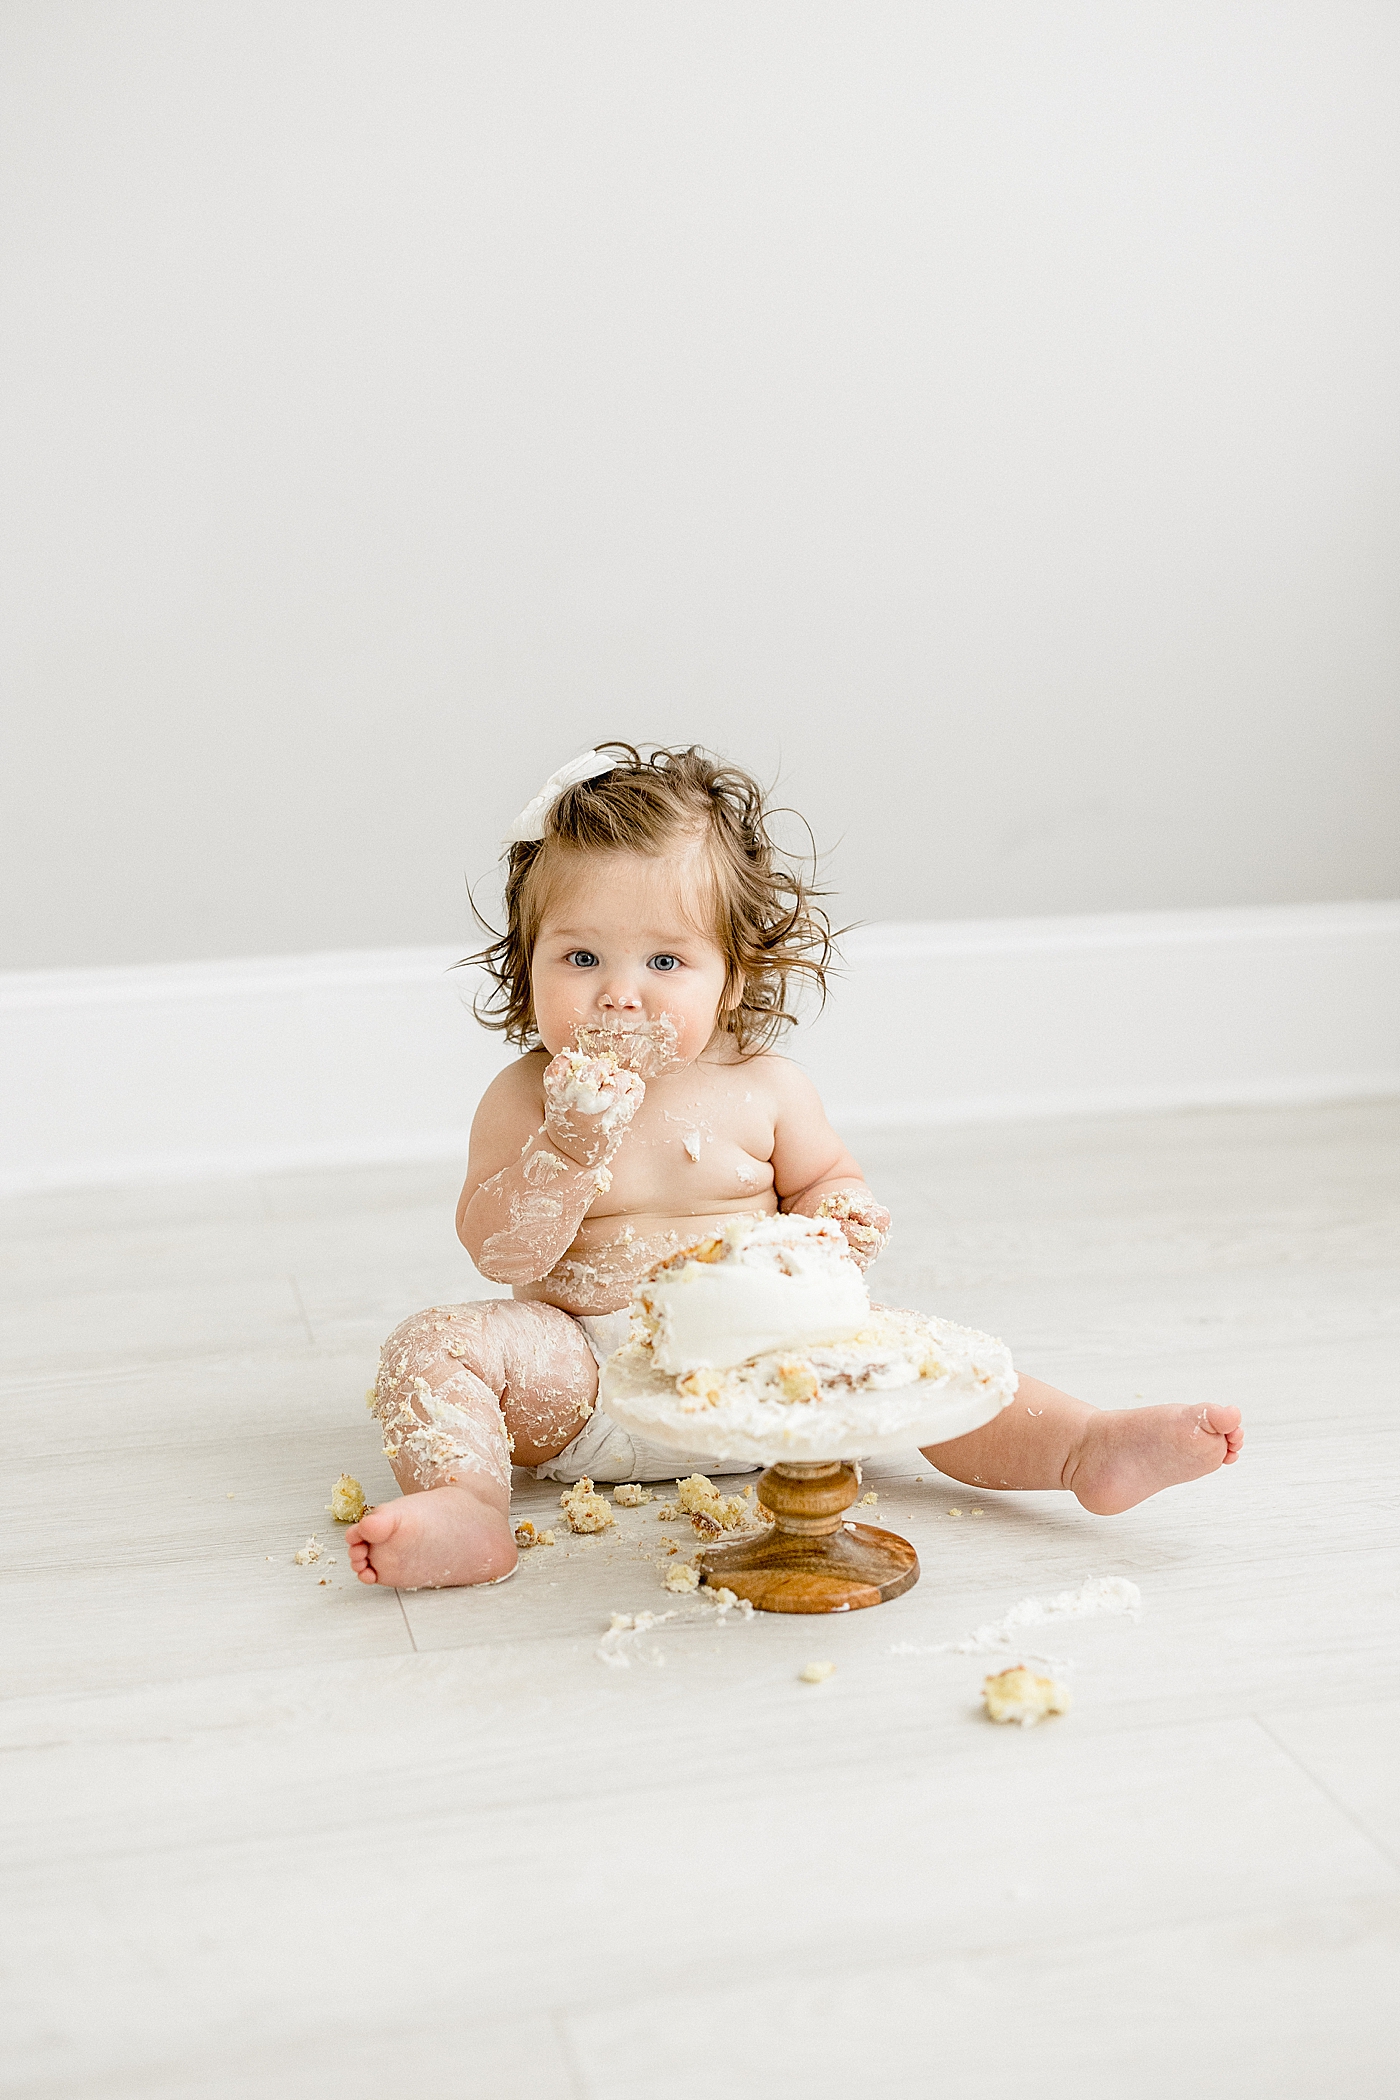 First birthday cake smash. Photo by Brittany Elise Photography.